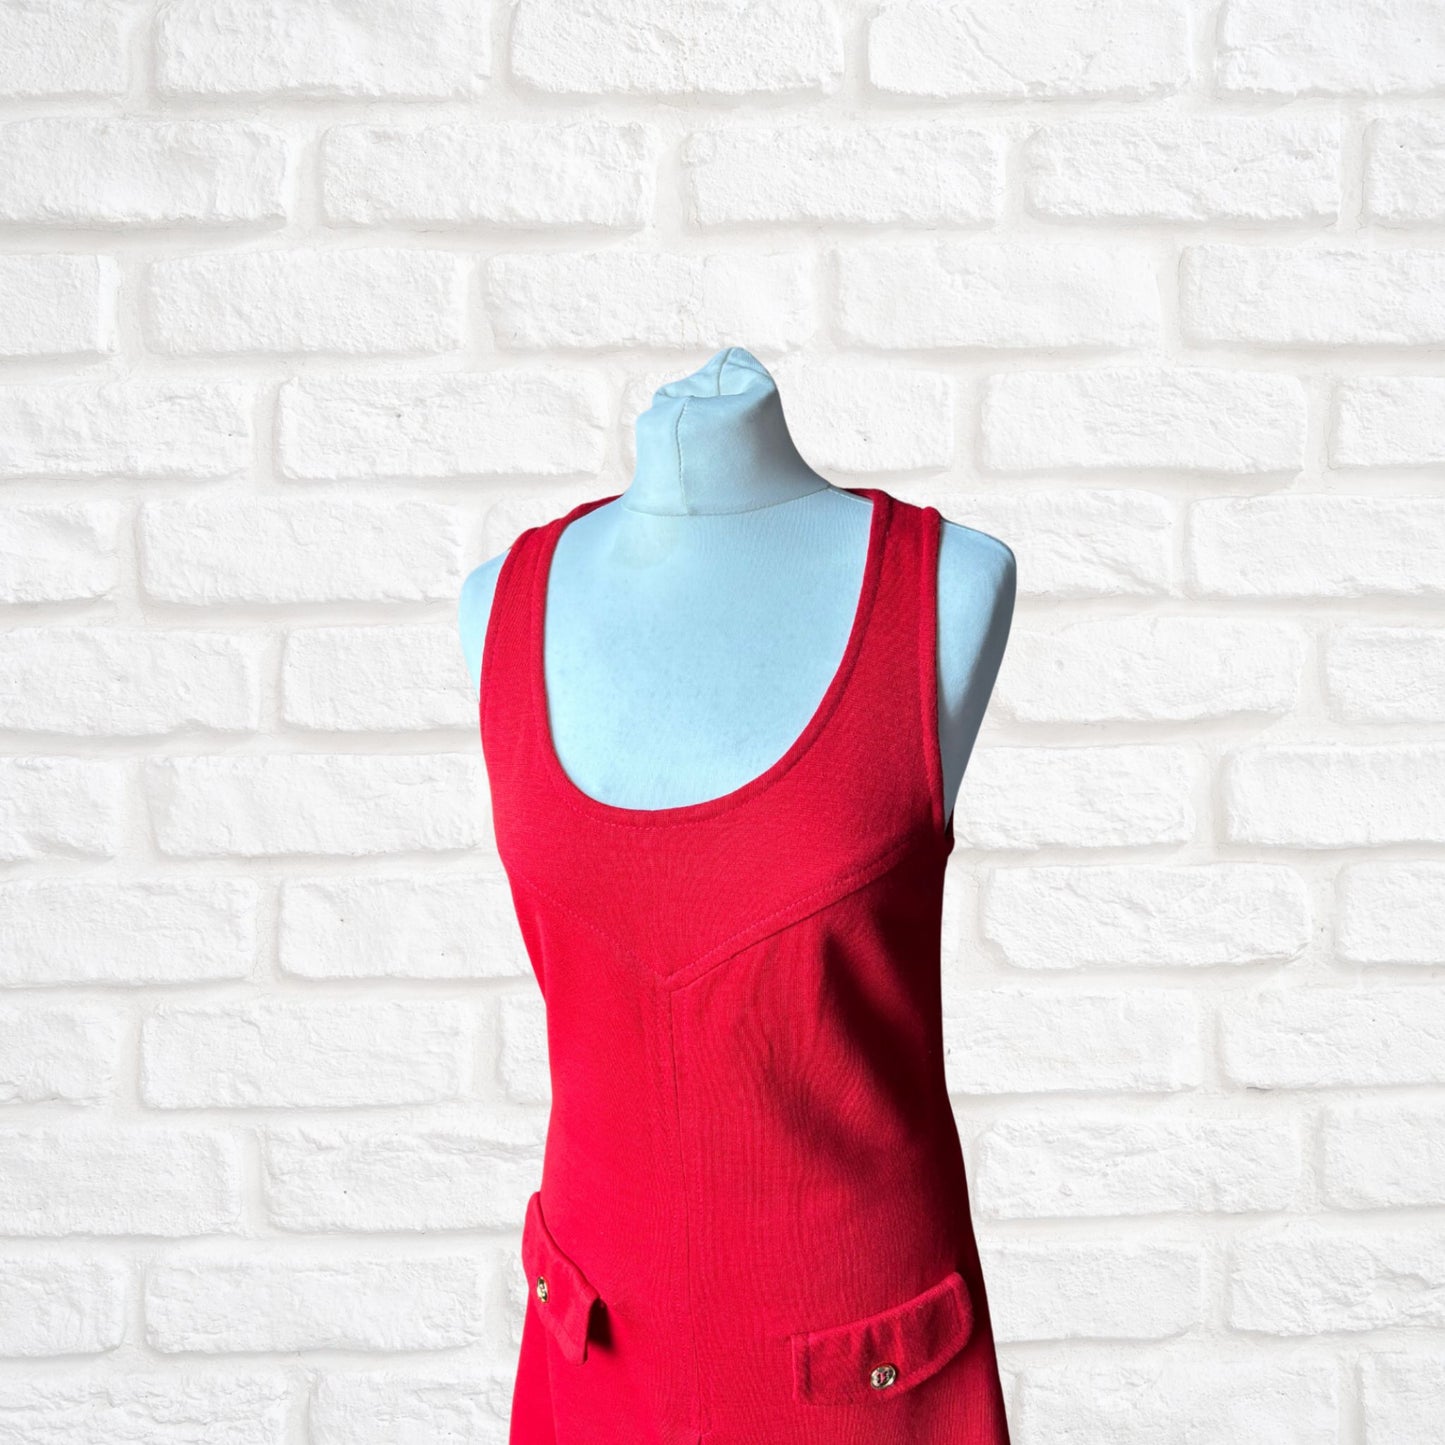 60s mod style red vintage pinafore dress with cute front faux pockets. Approx UK size 8-10